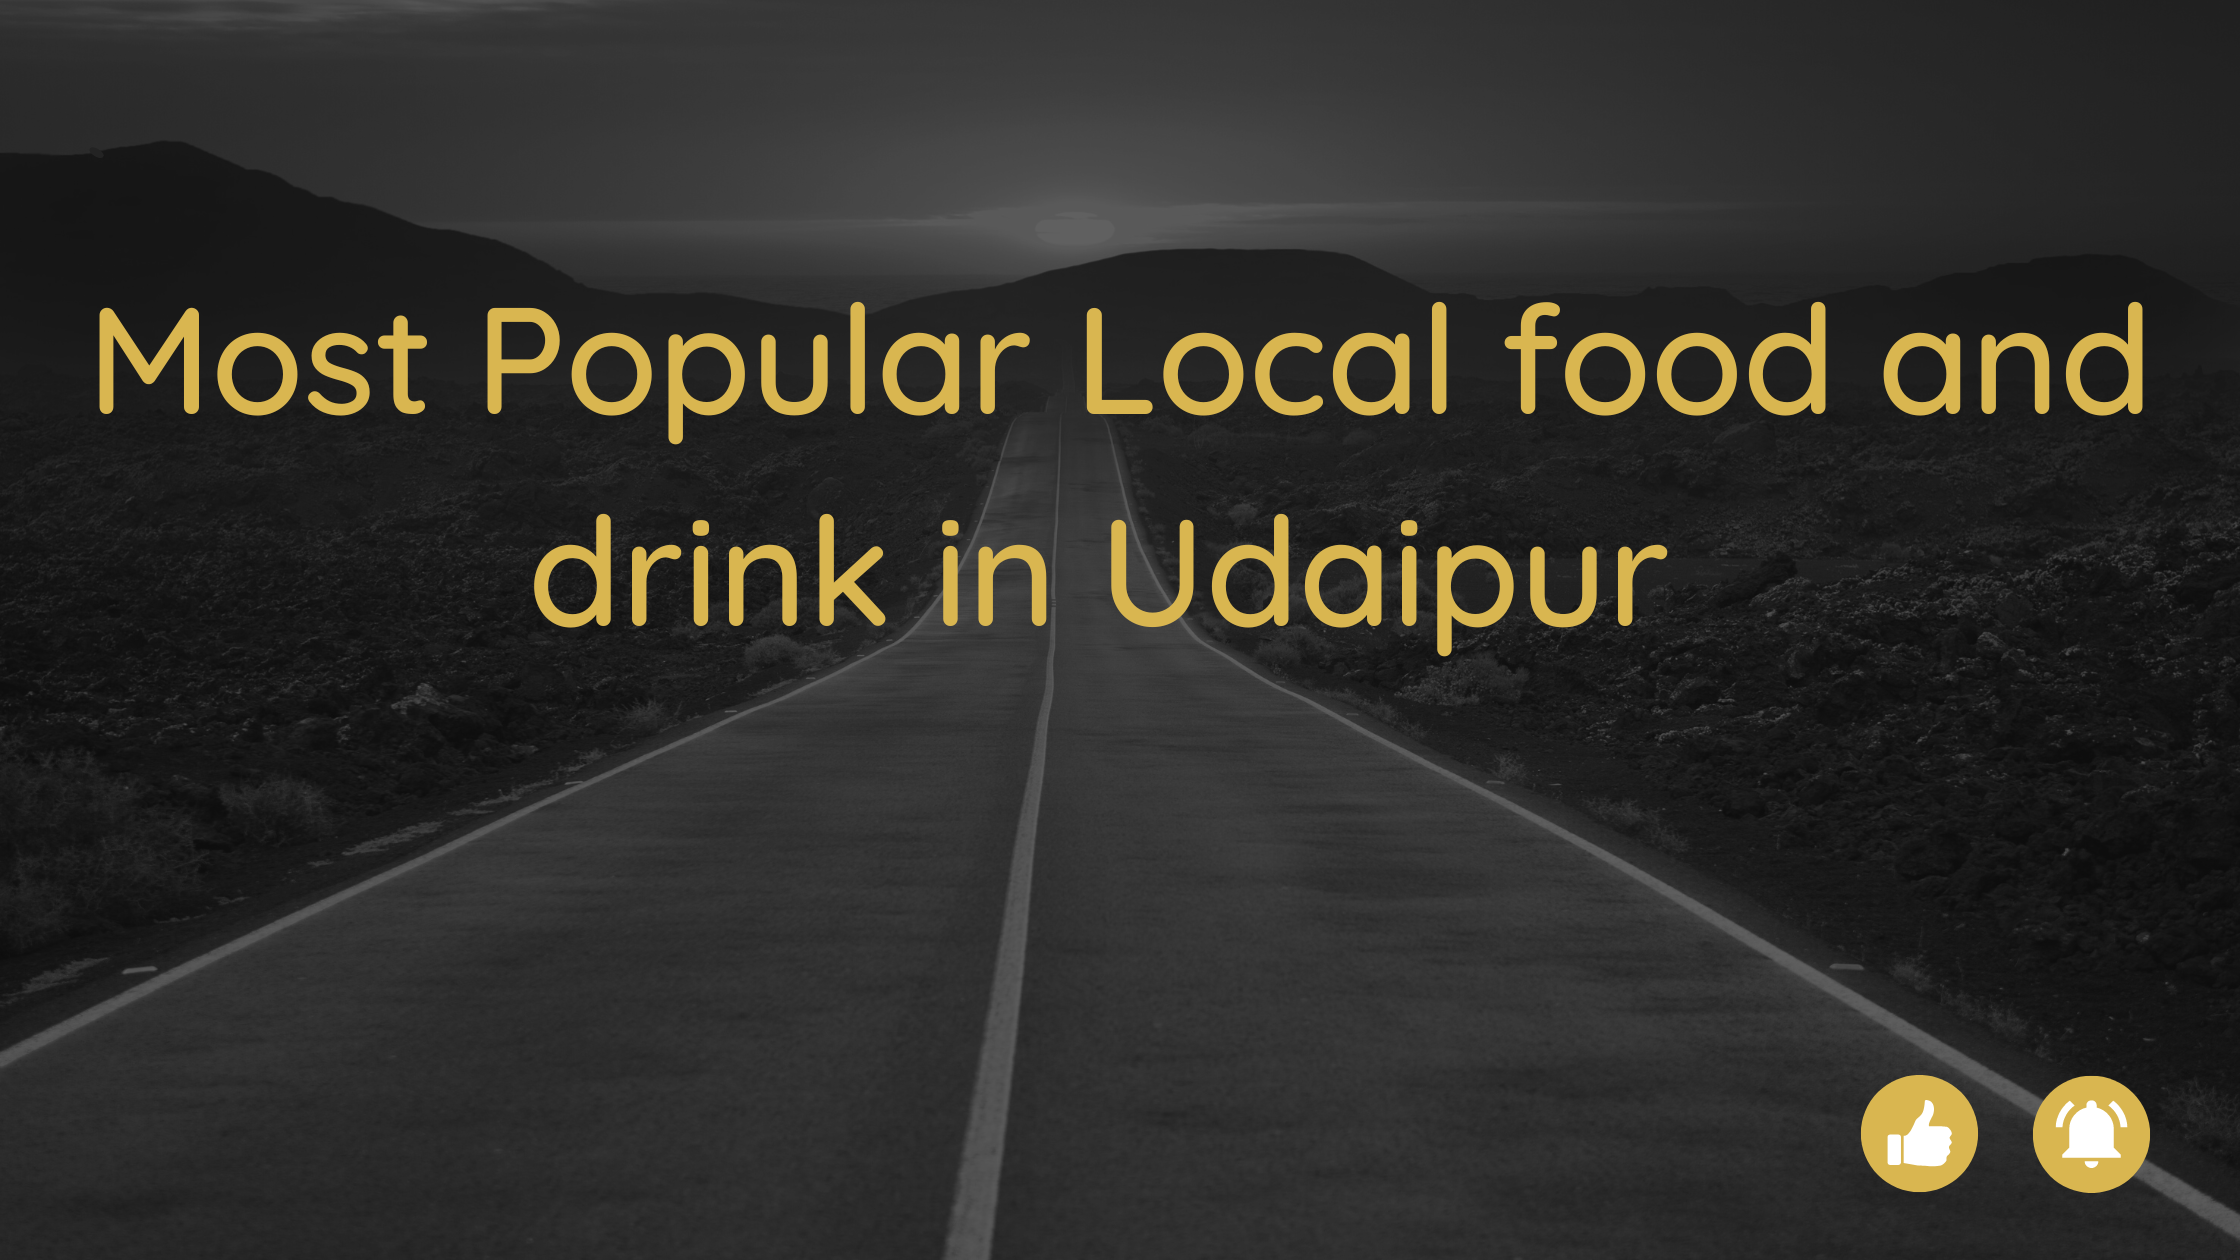 Most Popular Local food and drink in Udaipur 2023